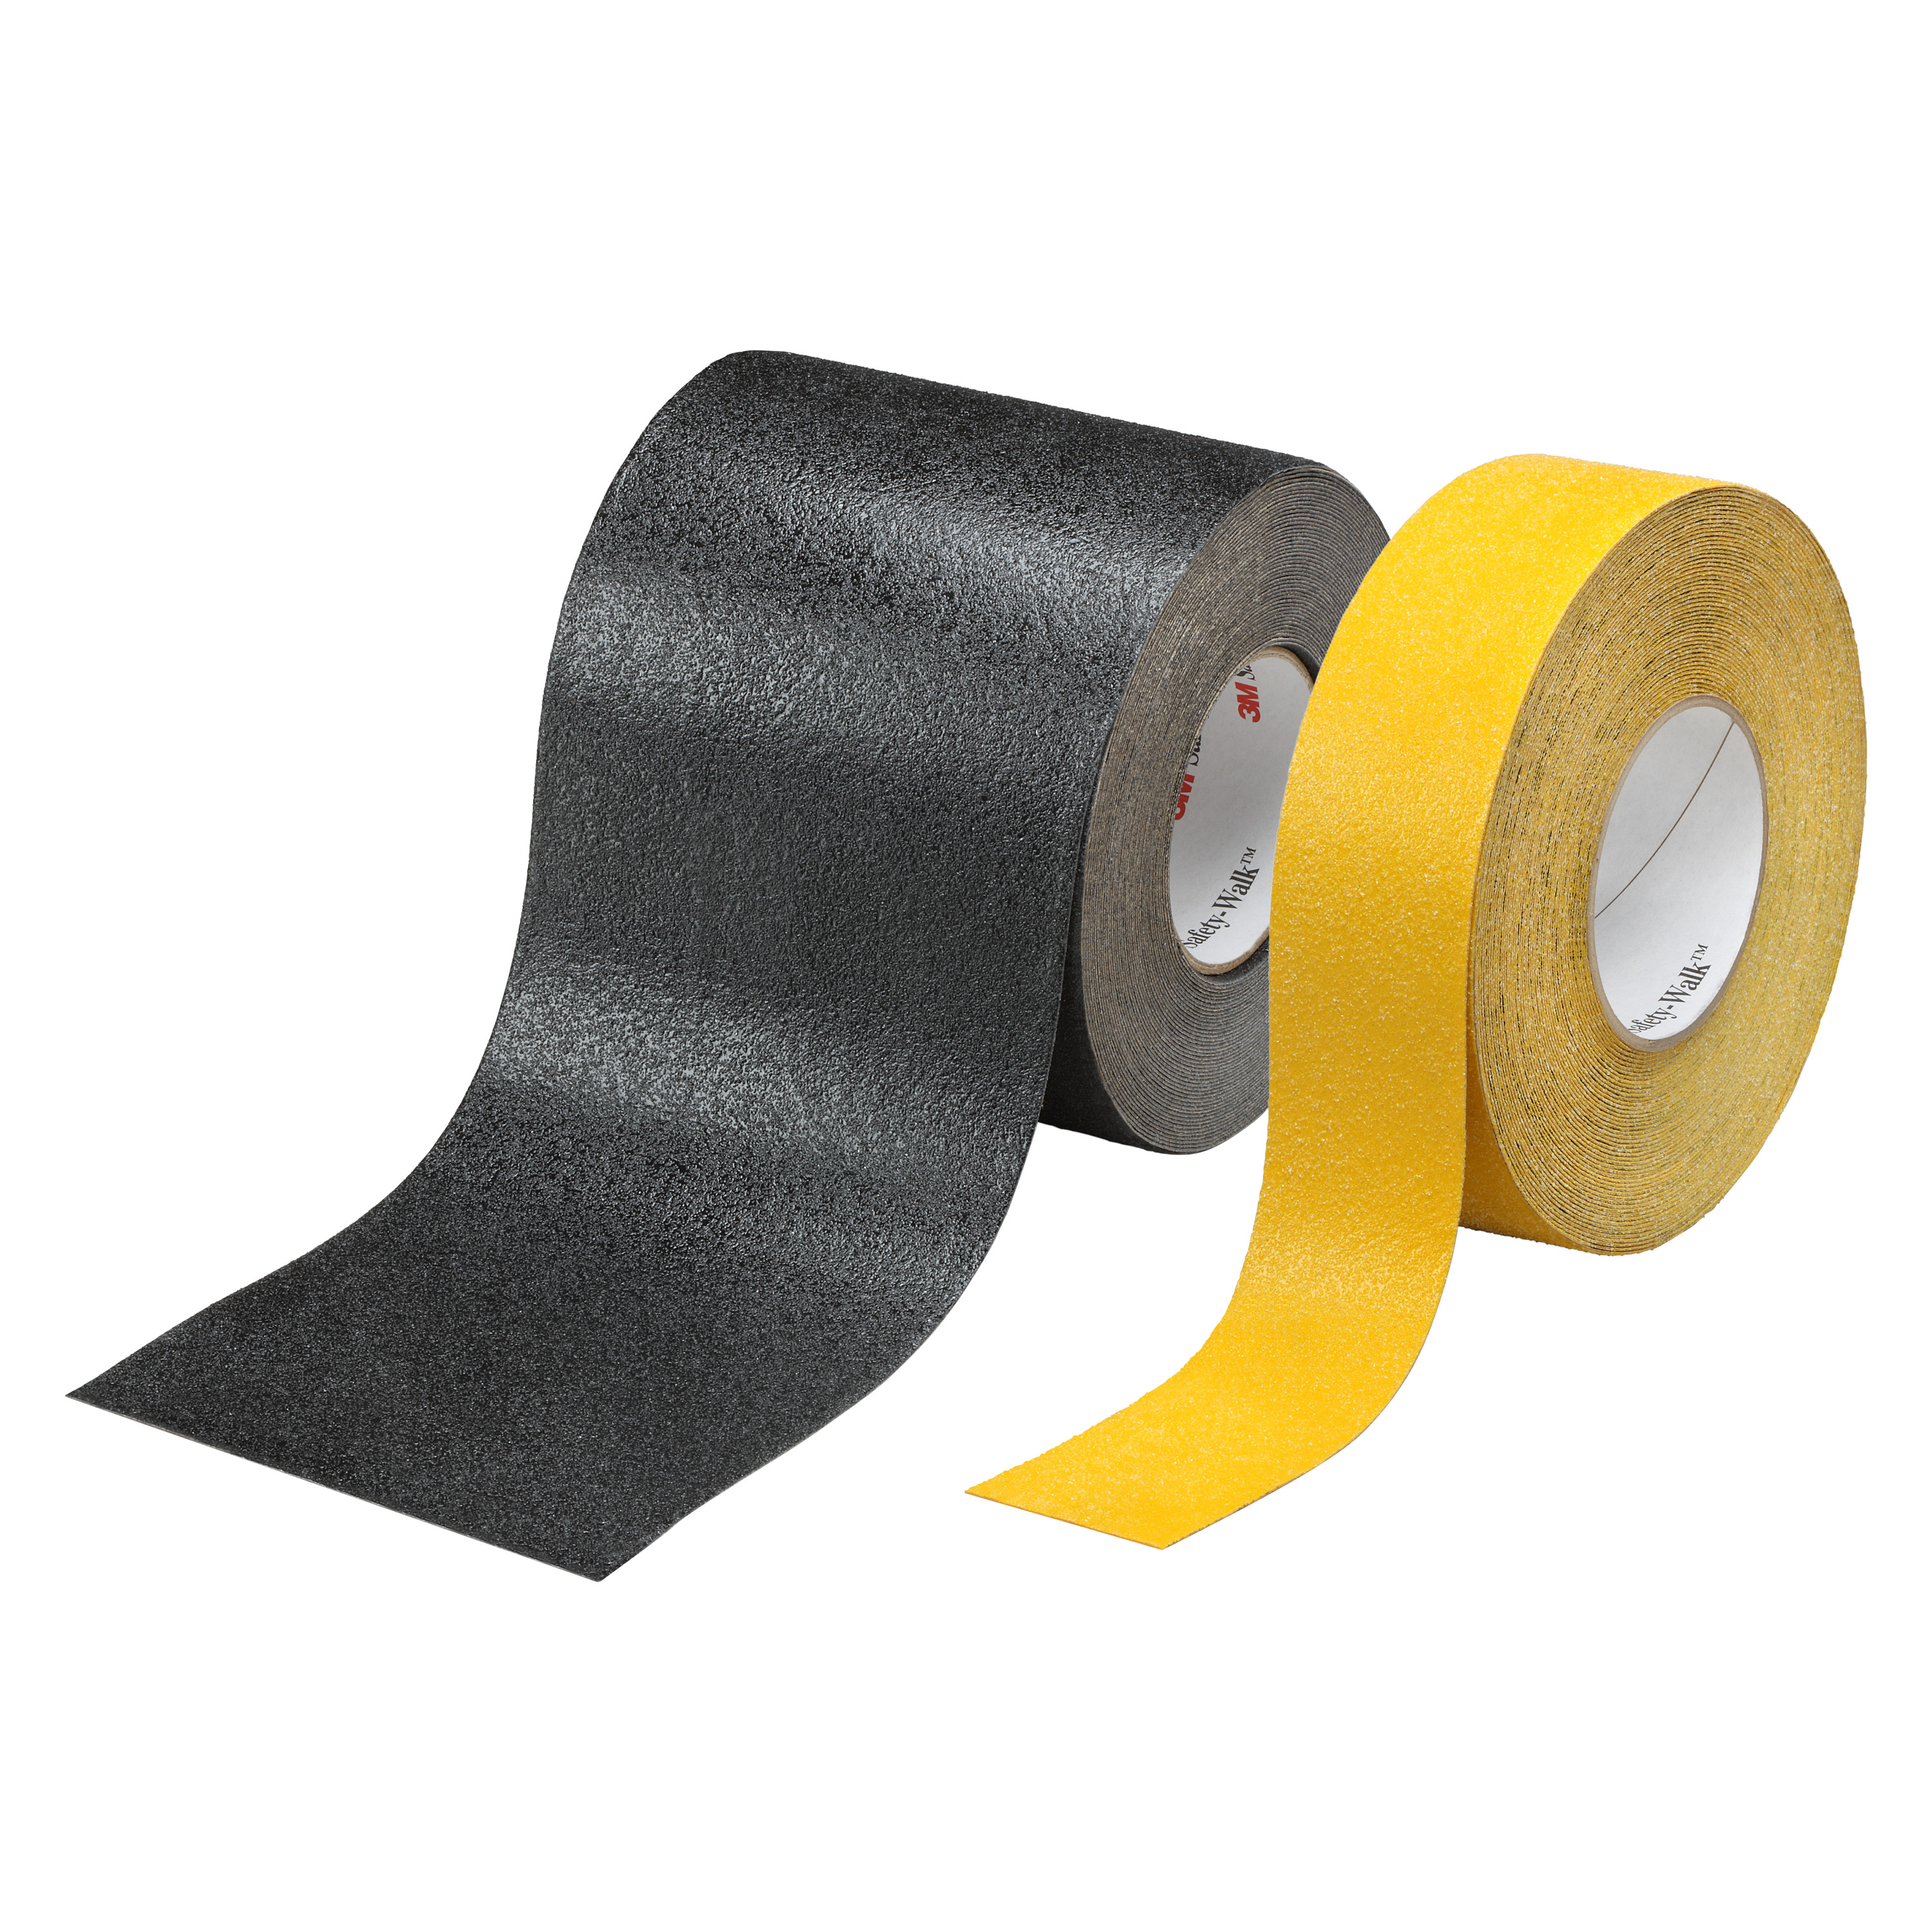 3M™ Safety-Walk™ Slip-Resistant Conformable Tapes and Treads 588, Roll, White, 48 in x 60 ft, 1 Roll/Case